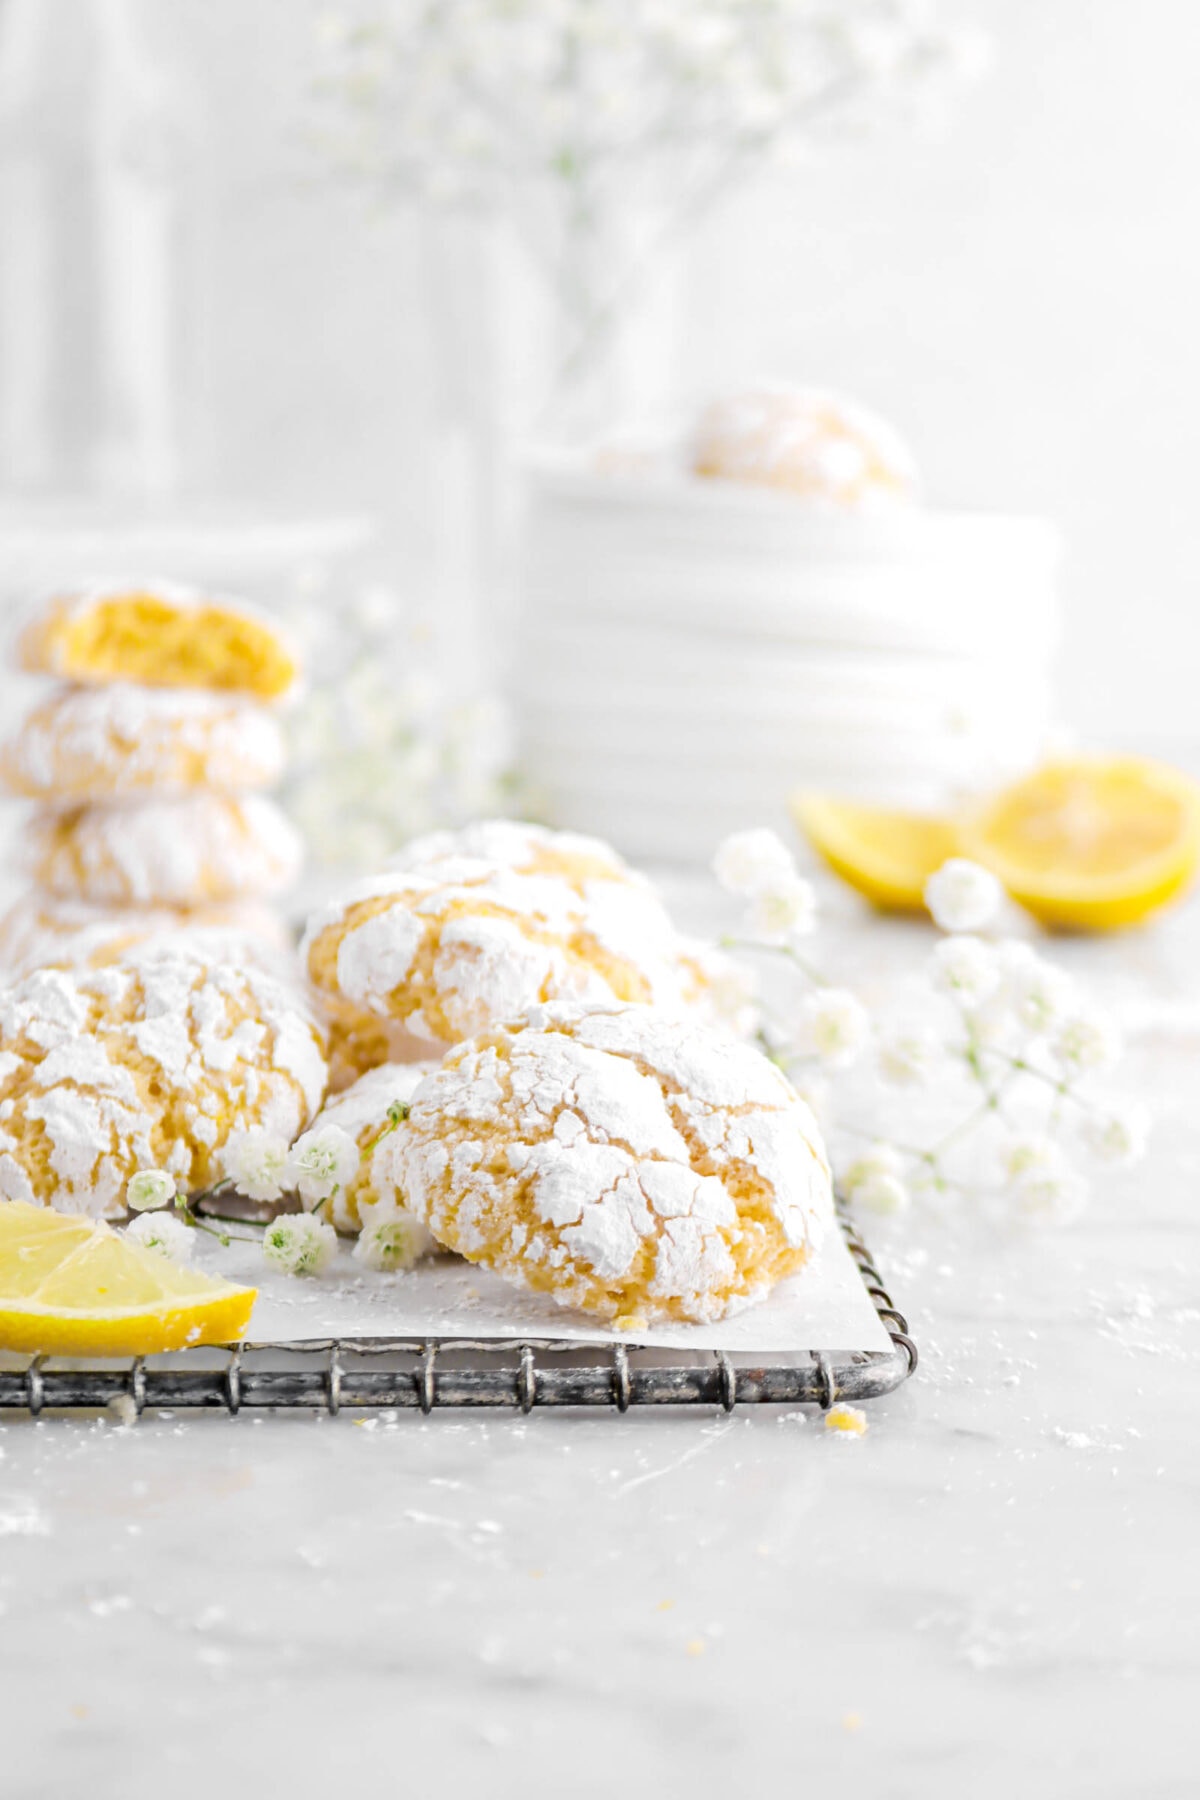 crinkle cookies on small wire tray with parchment paper, flowers, and lemon slices